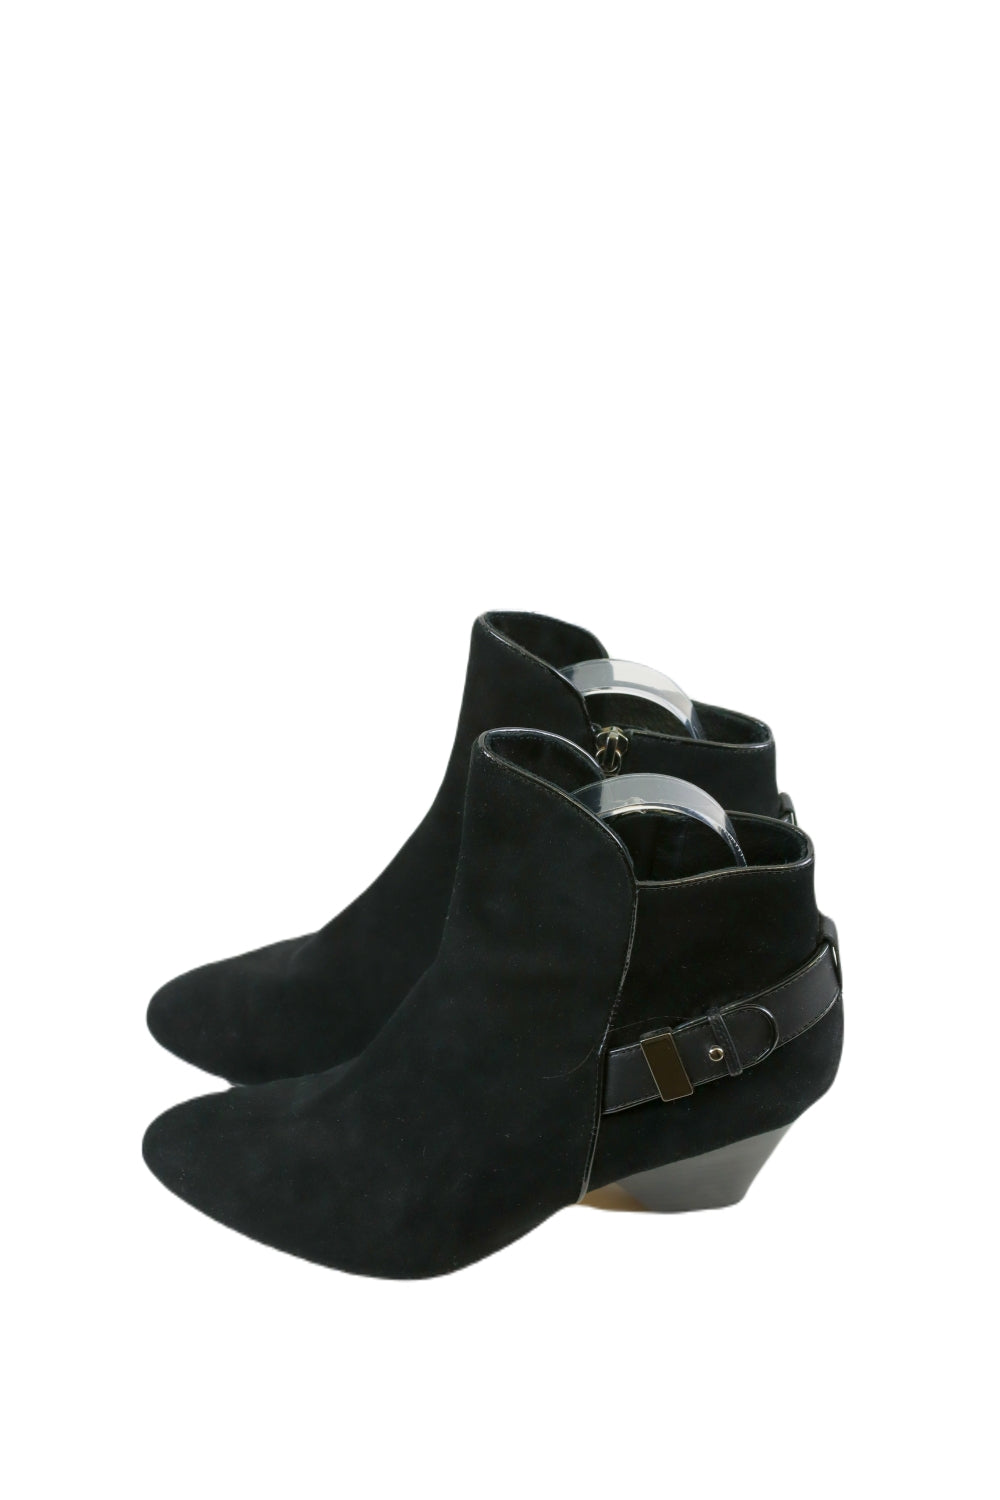 Mimco Black Boots With Wedge 37